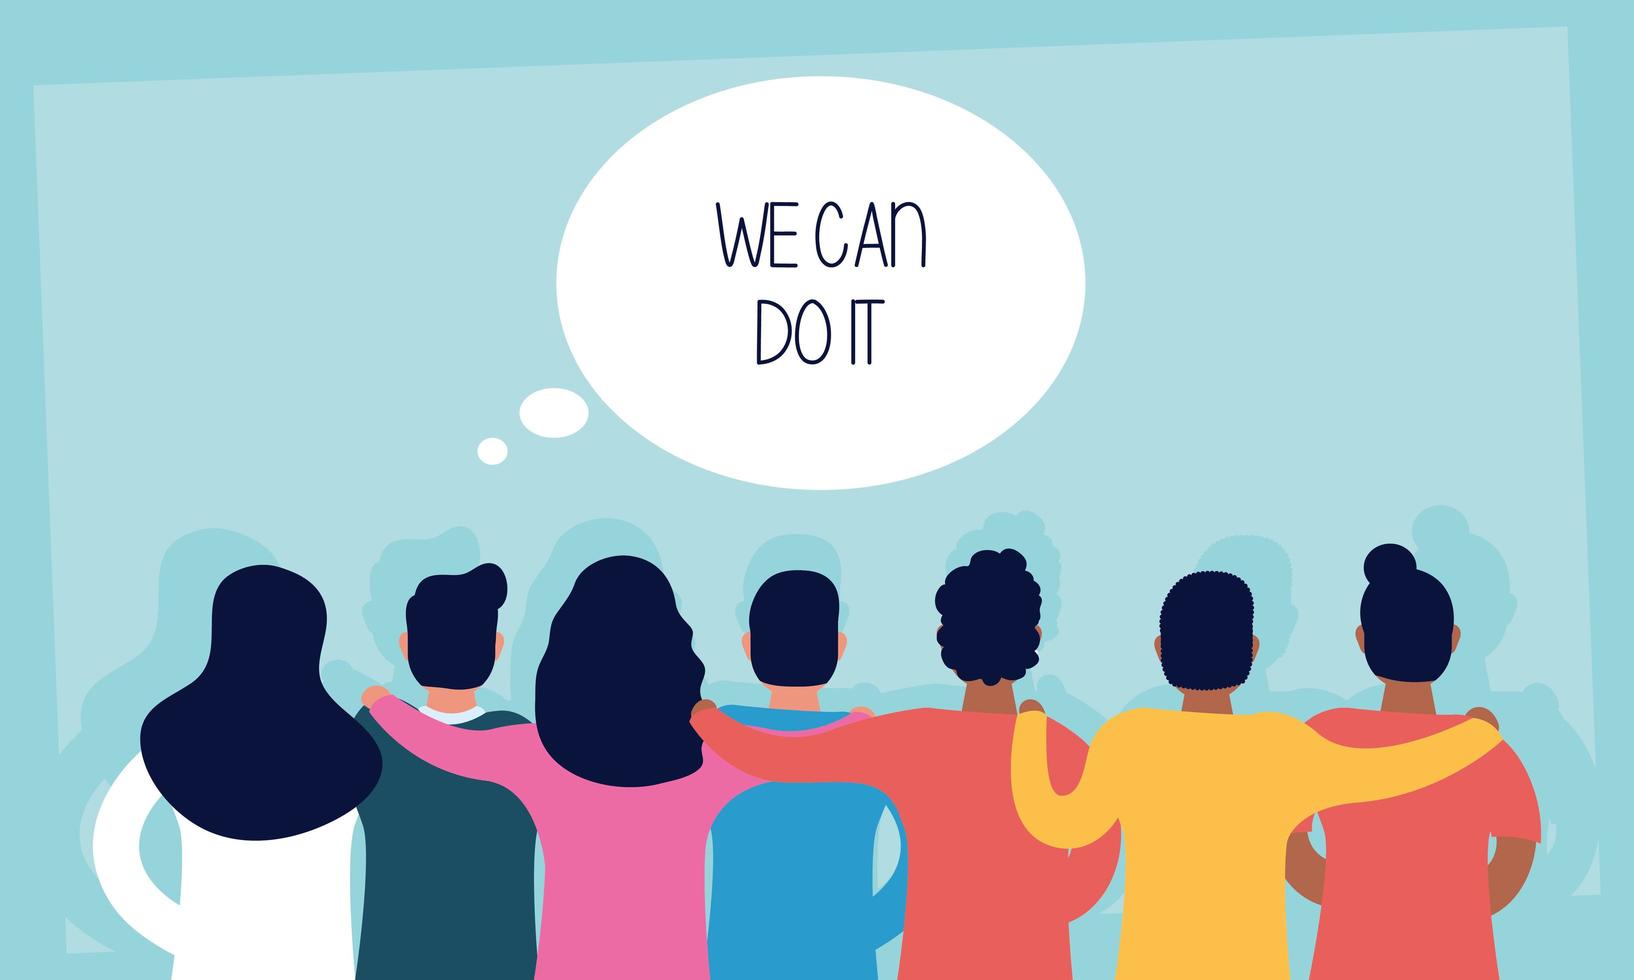 group of people back with we can do it message in speech bubble vector